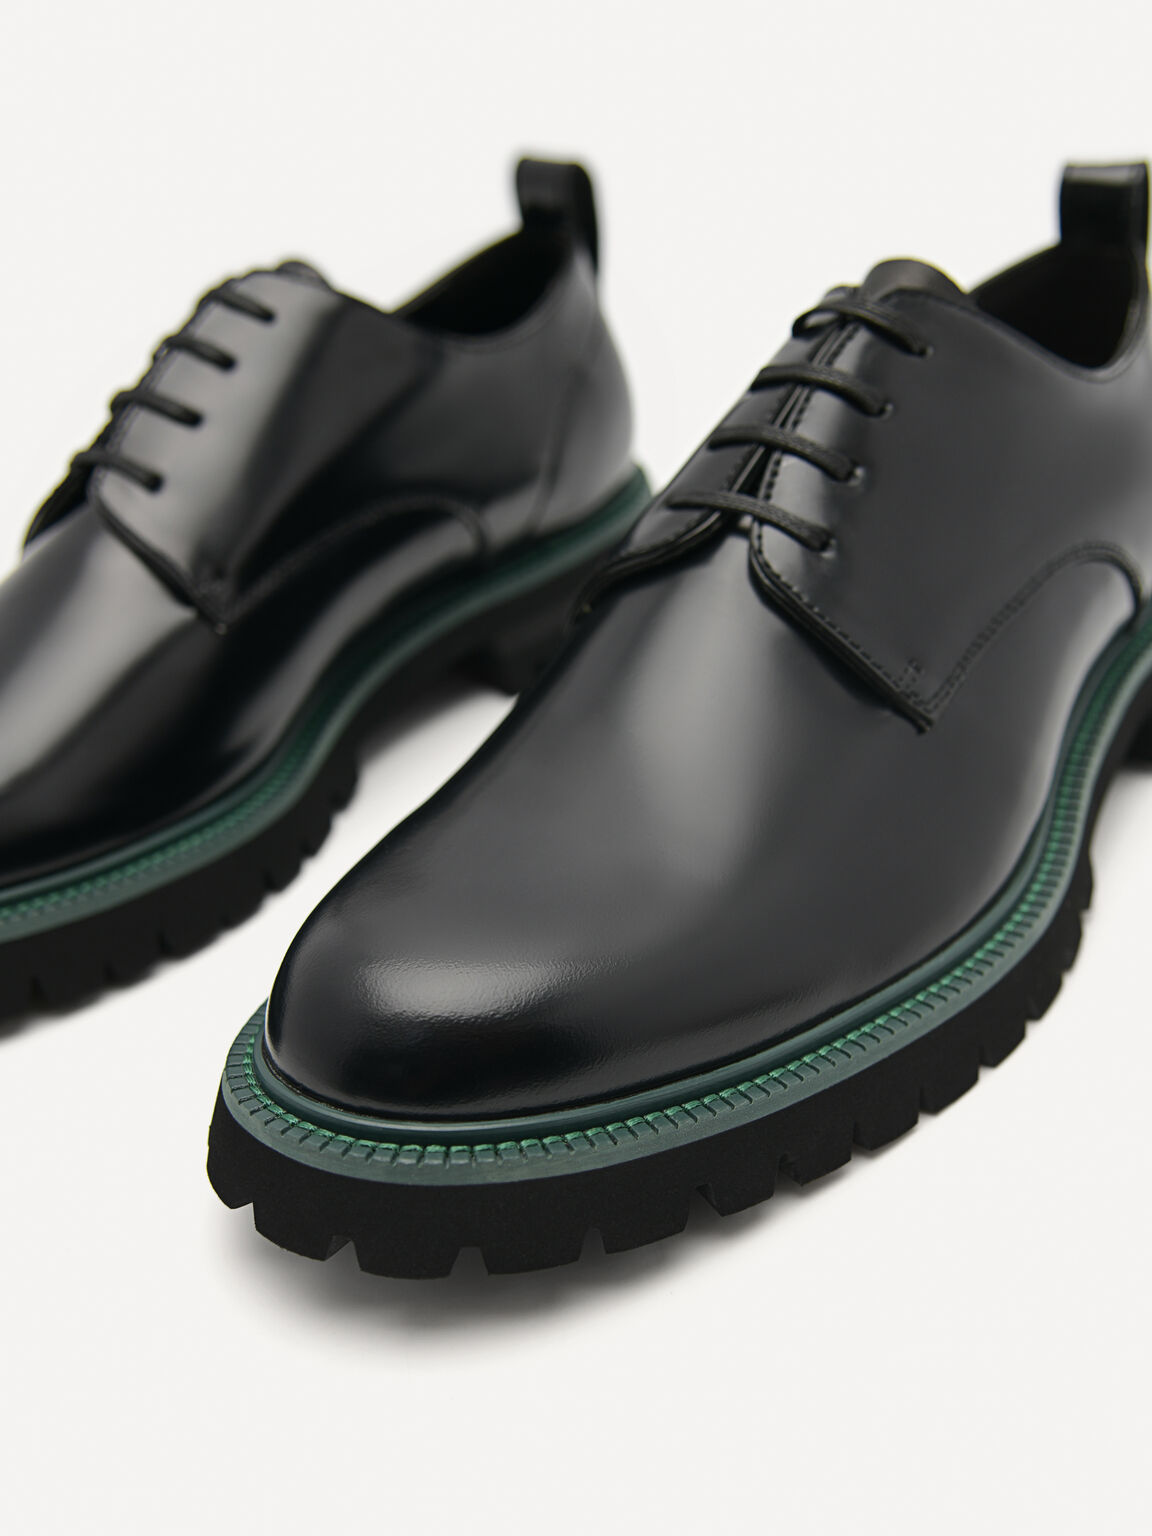 Hendrix Leather Derby Shoes, Black